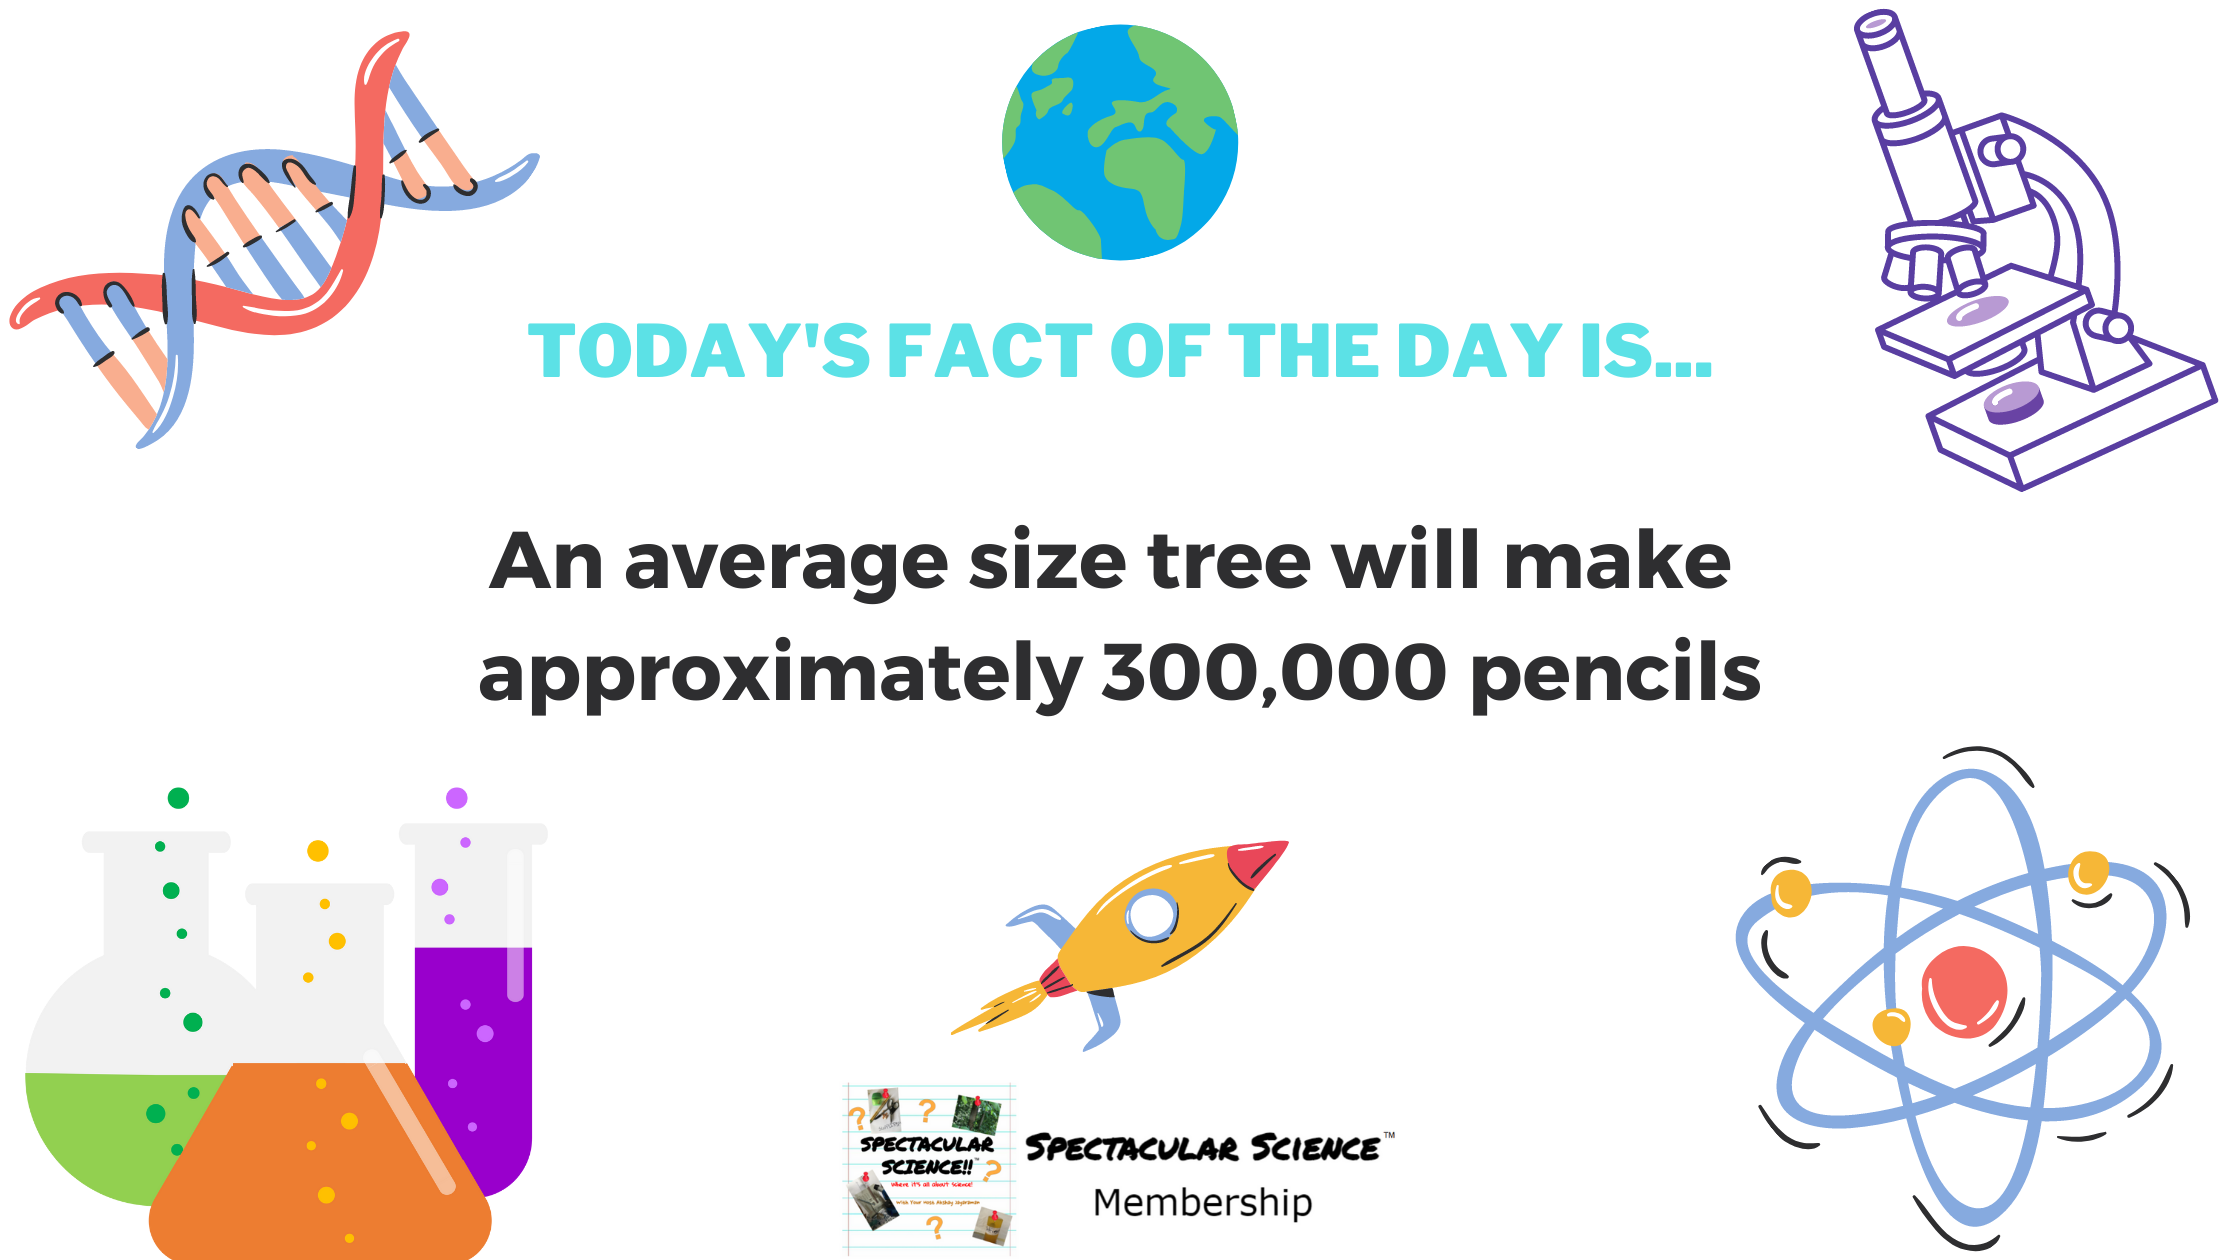 Fact of the Day Image May 19th